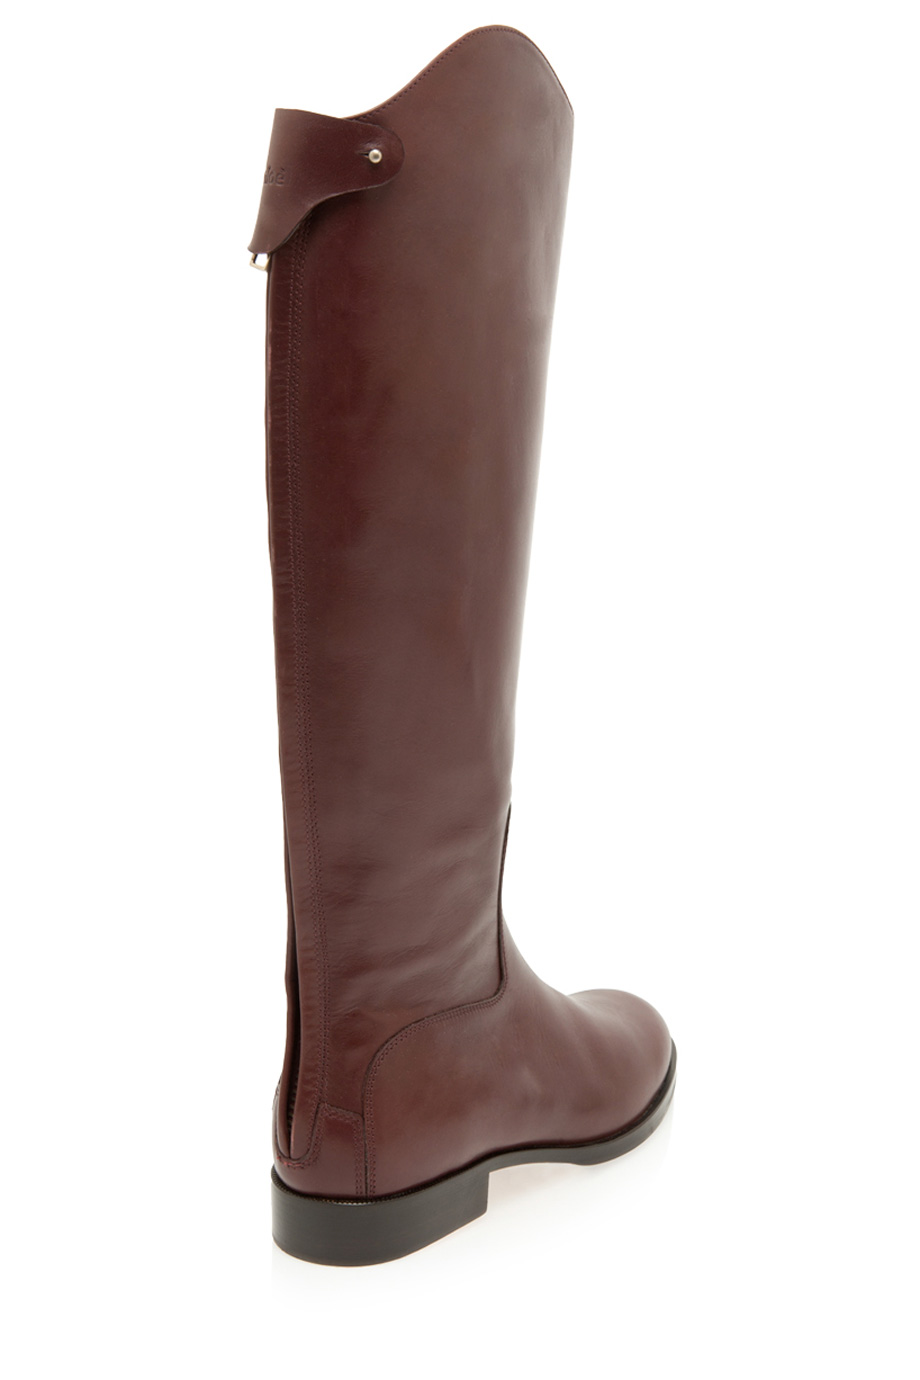 Chloé Zip Back Riding Boot in Brown - Lyst